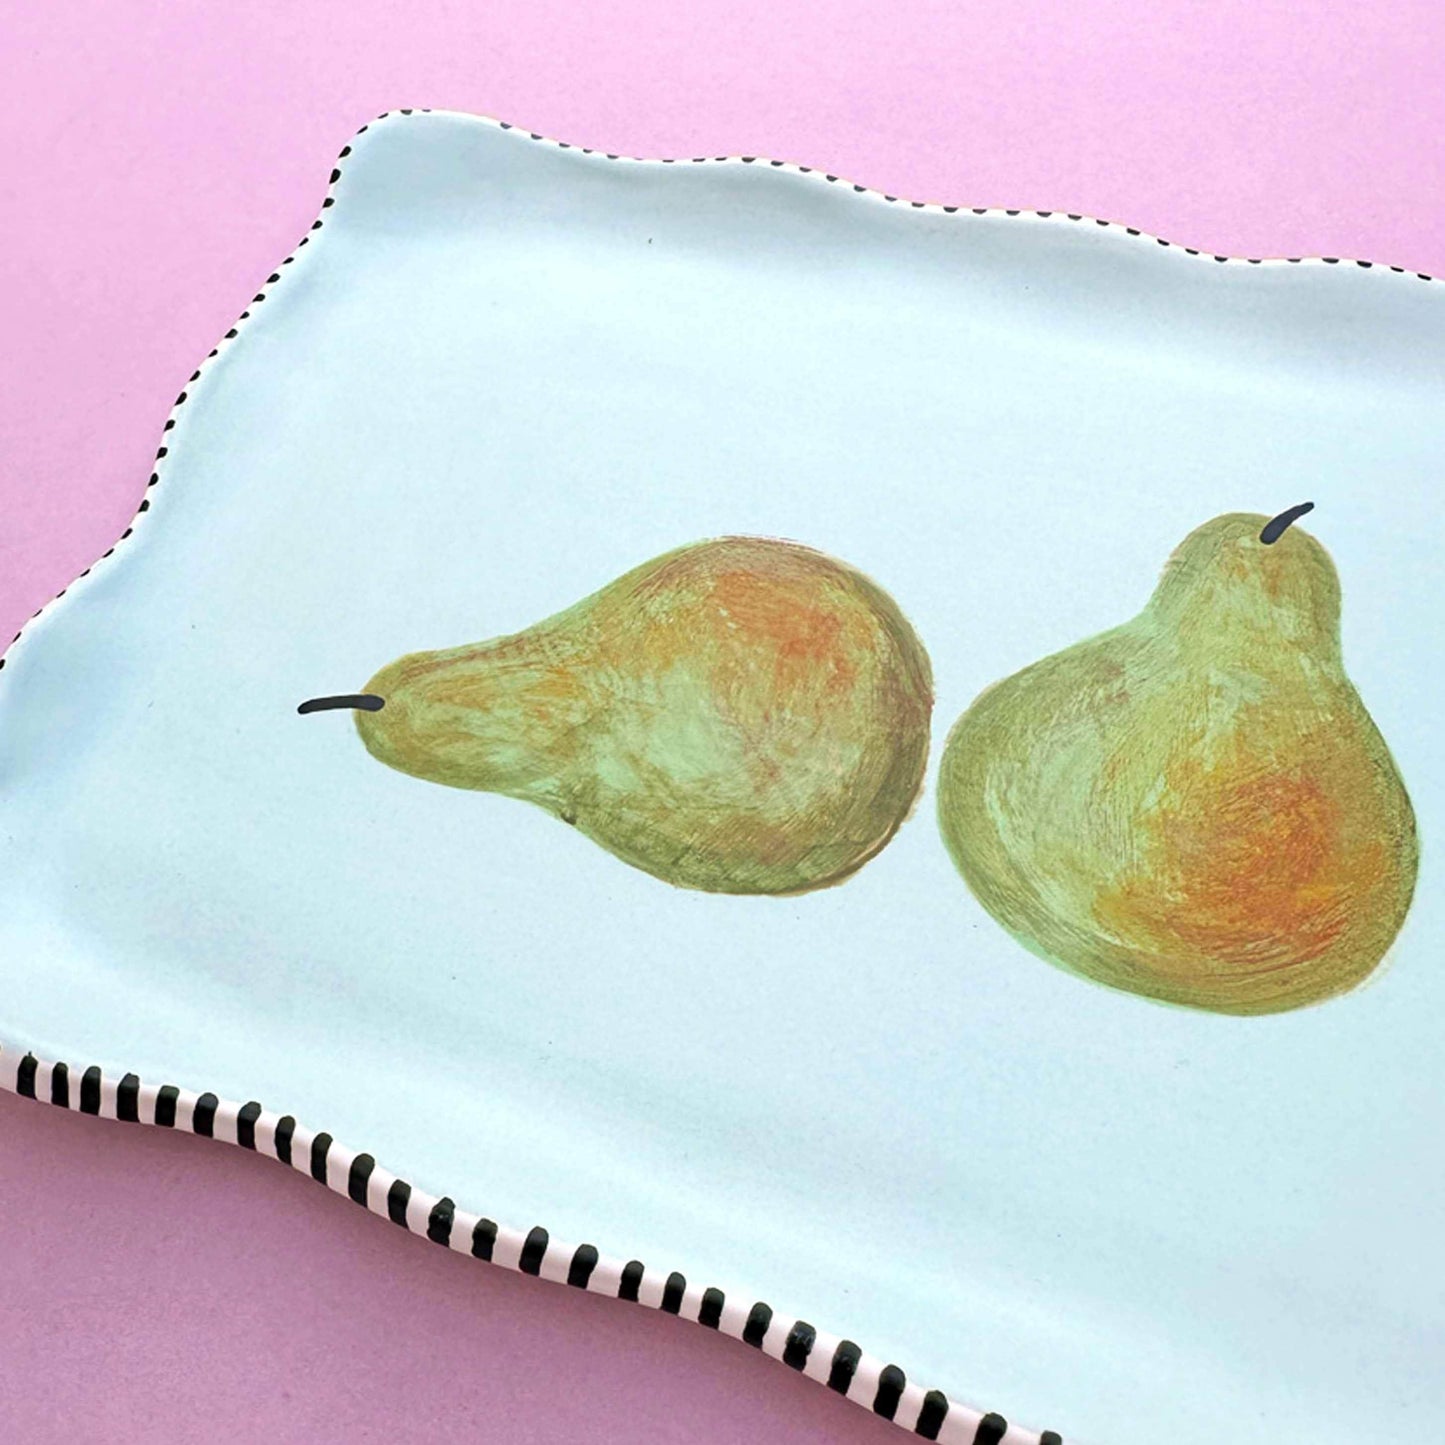 Load image into Gallery viewer, Pear Canapé Platter
